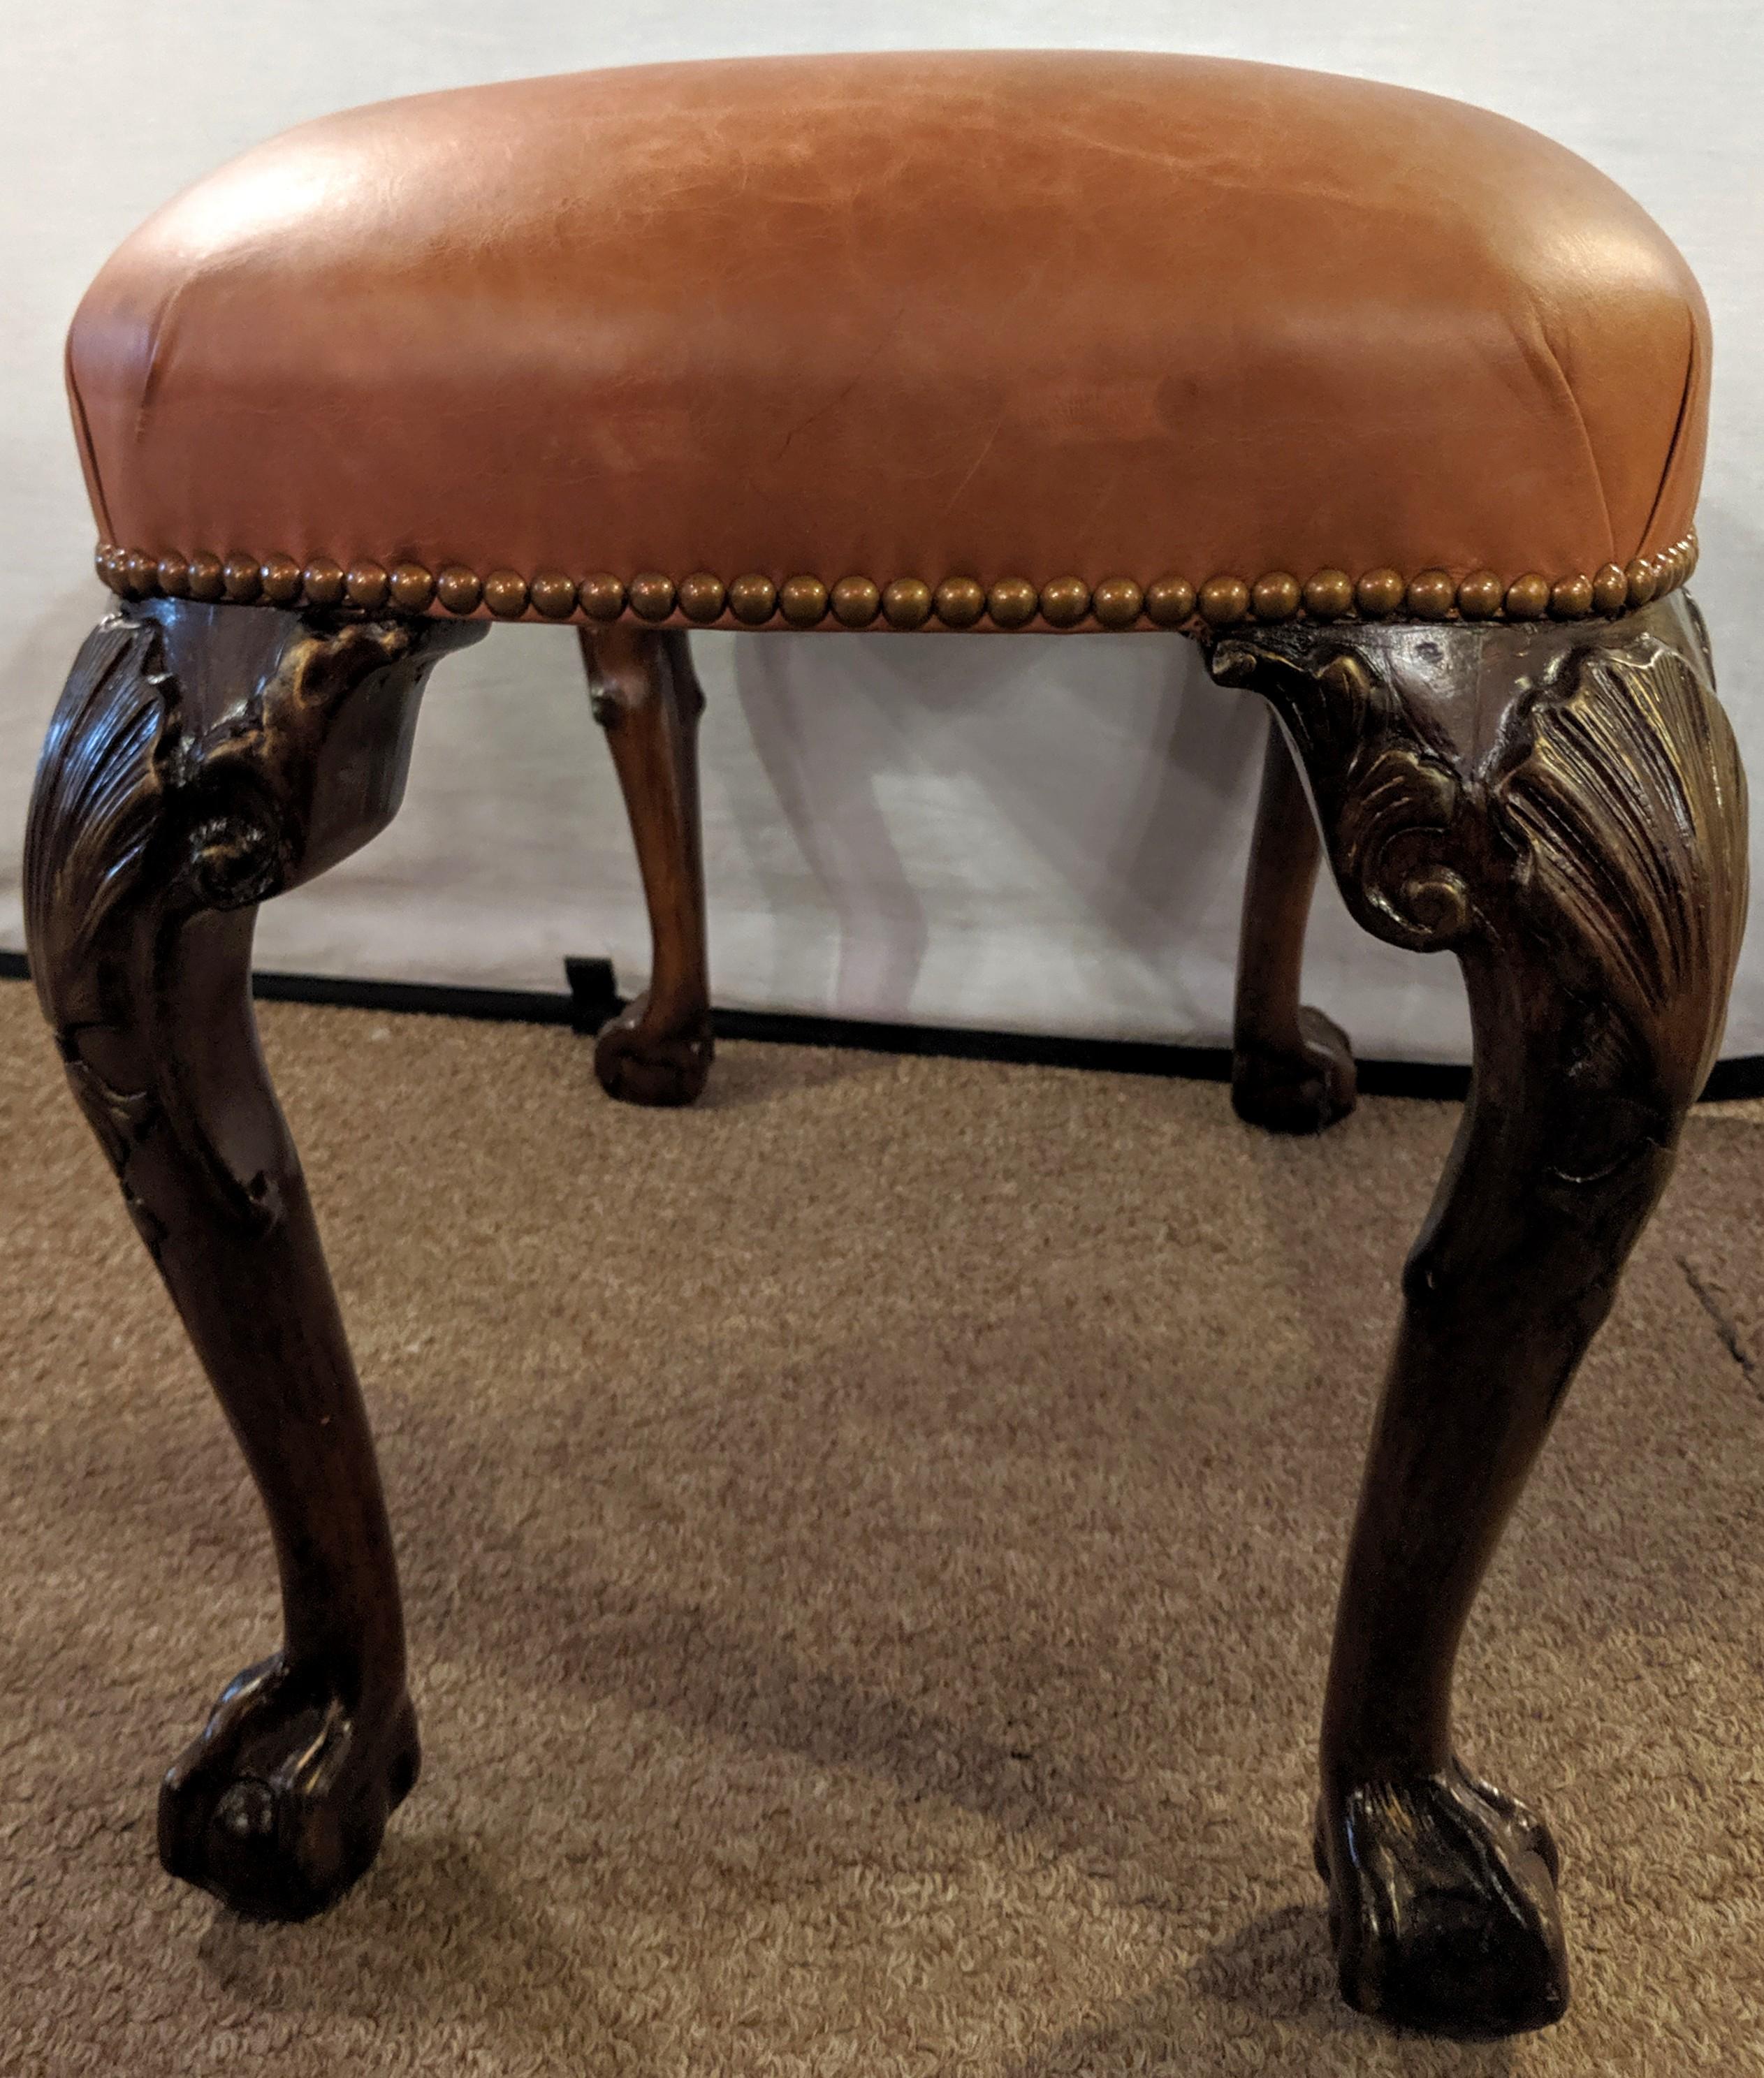 Georgian leather ball and claw foot stool or bench having a wonderfully detailed cabriole leg and hairy ball and claw foot.